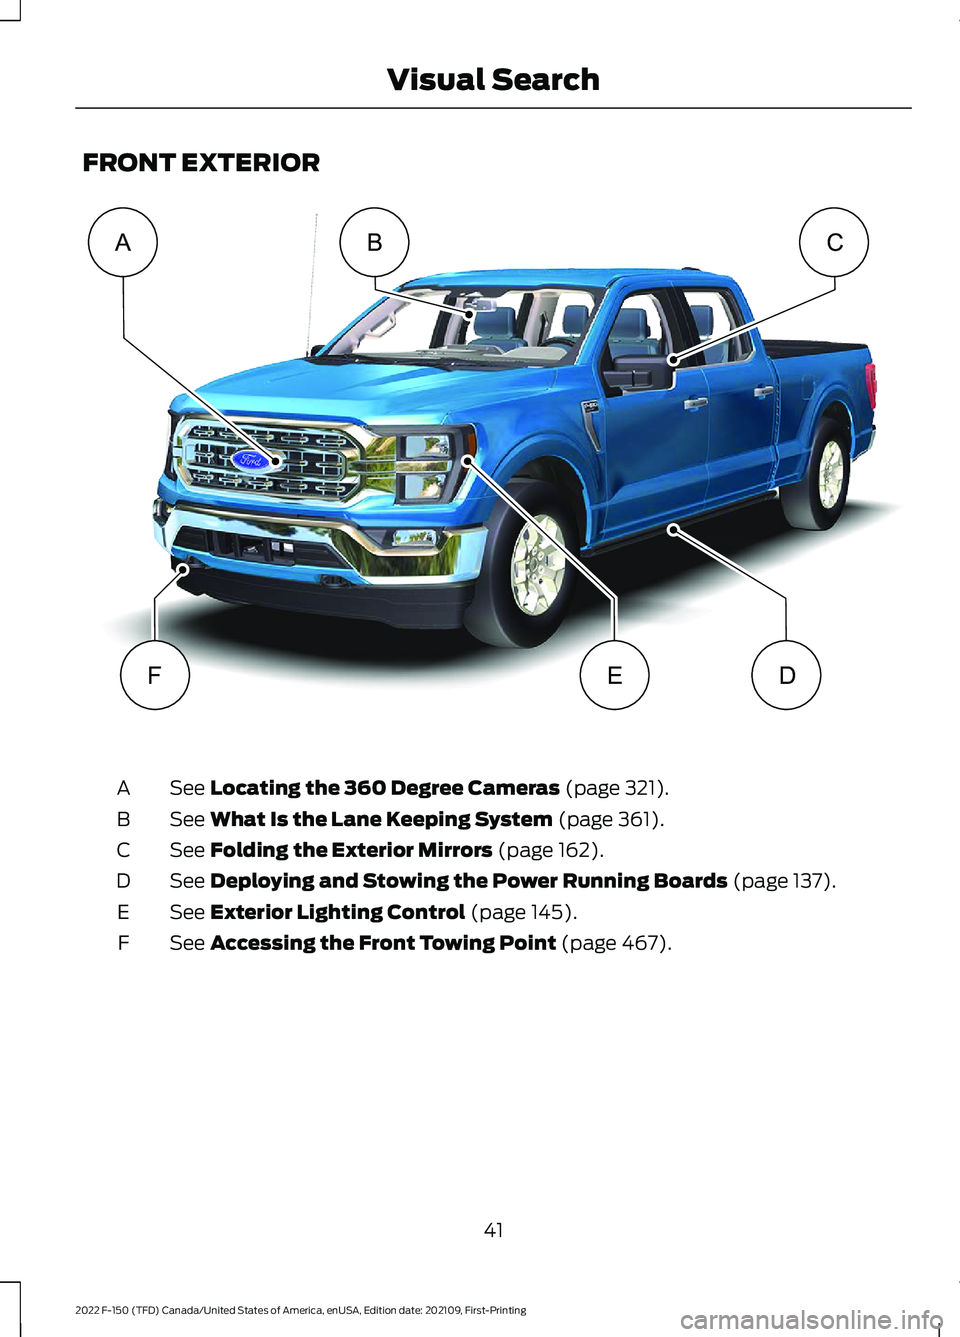 FORD F-150 2022  Owners Manual FRONT EXTERIOR
See Locating the 360 Degree Cameras (page 321).
A
See 
What Is the Lane Keeping System (page 361).
B
See 
Folding the Exterior Mirrors (page 162).
C
See 
Deploying and Stowing the Power